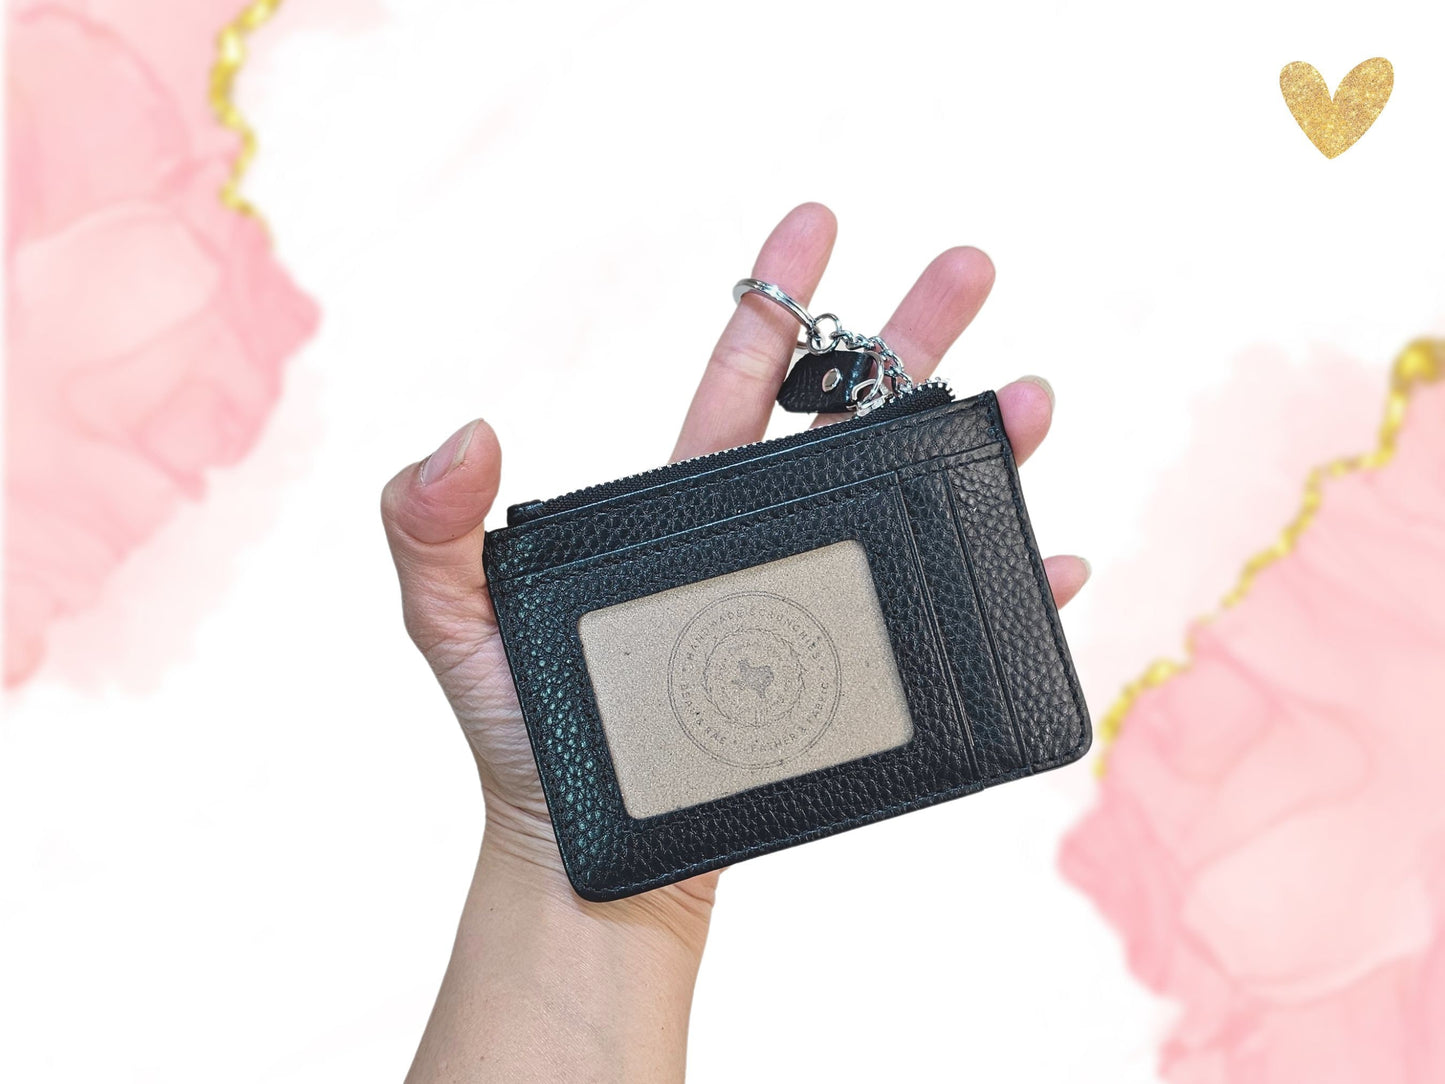 Personalized Monogram Credit Card Holder, Black Hot Pink Red Rose, Leather Minimalist ID Card Wallet with Zipper and Keyring